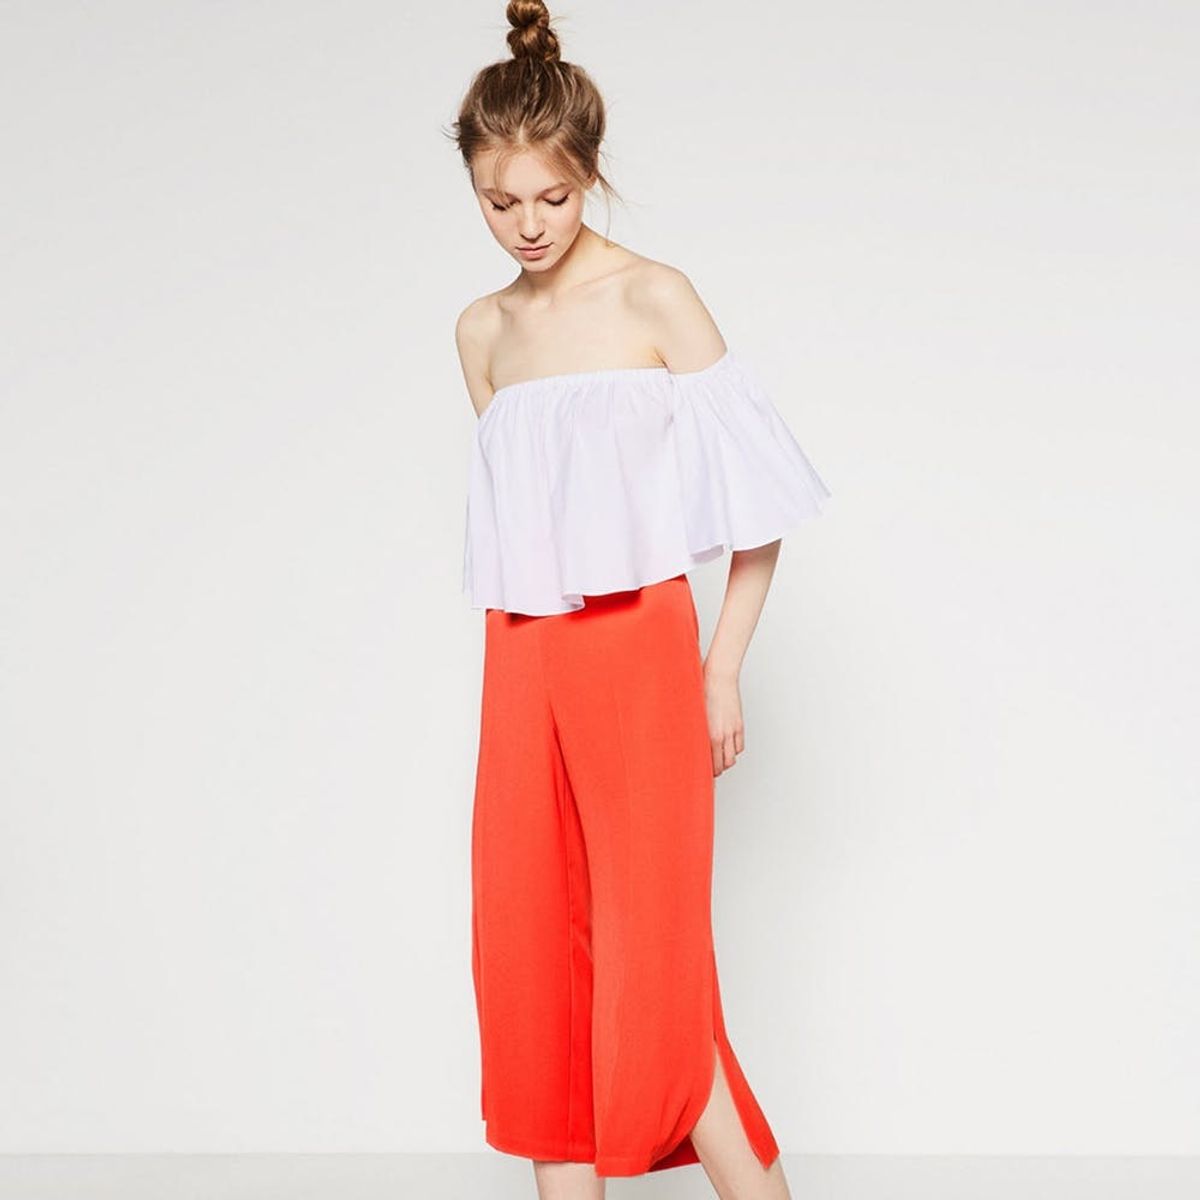 23 of the Best Items from Zara’s Summer Sale (Hurry!) - Brit + Co